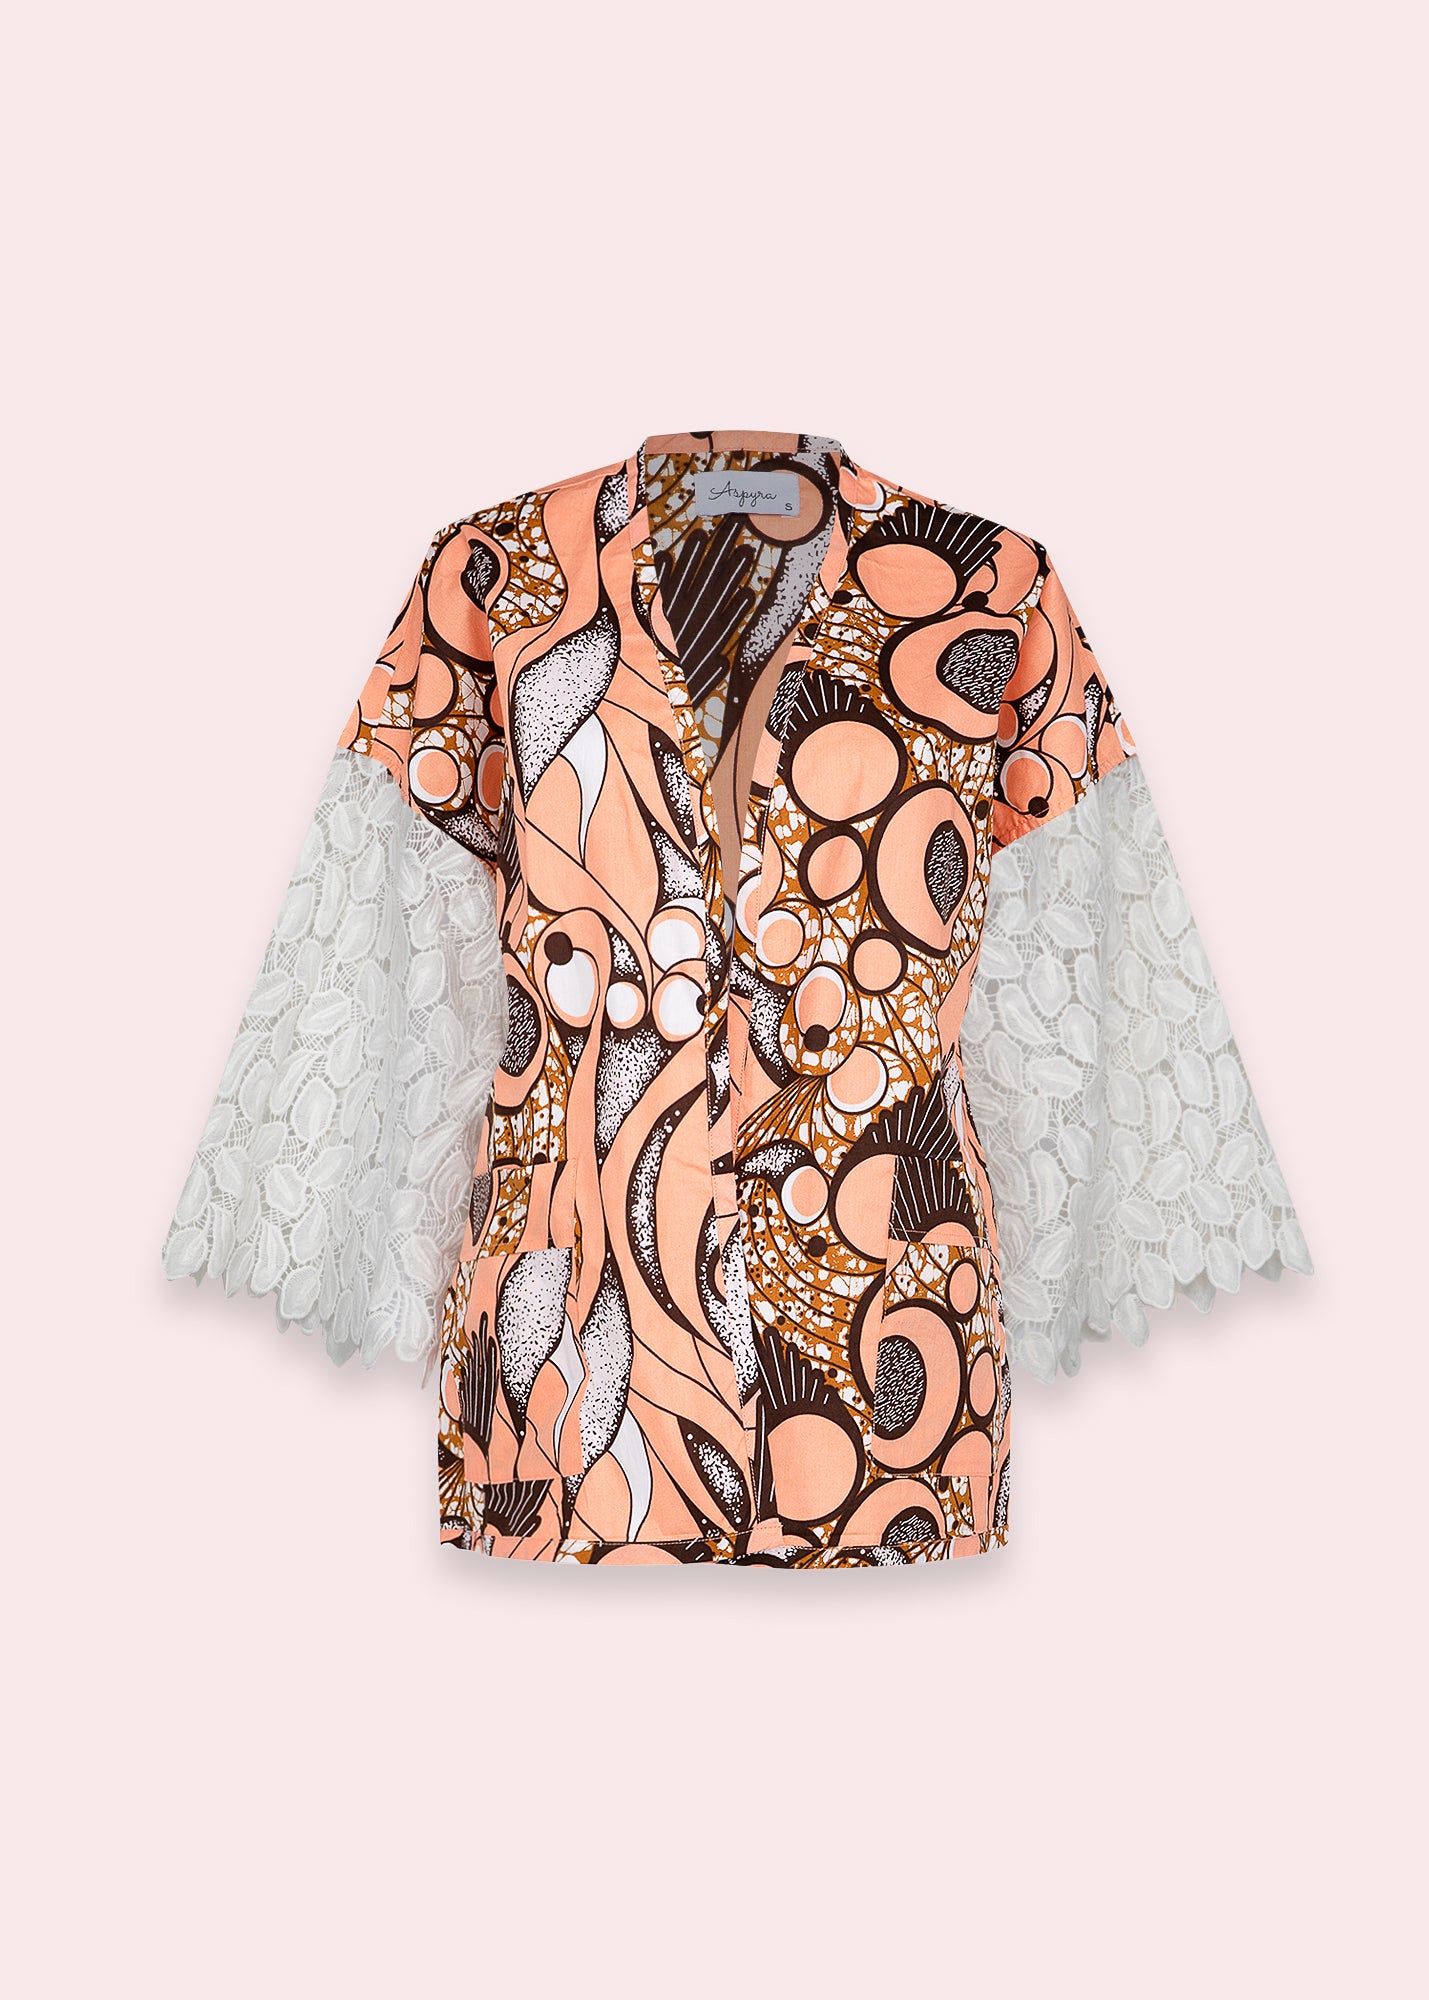 Theme Song in Peachtree Short Kimono Jacket with Lace 3